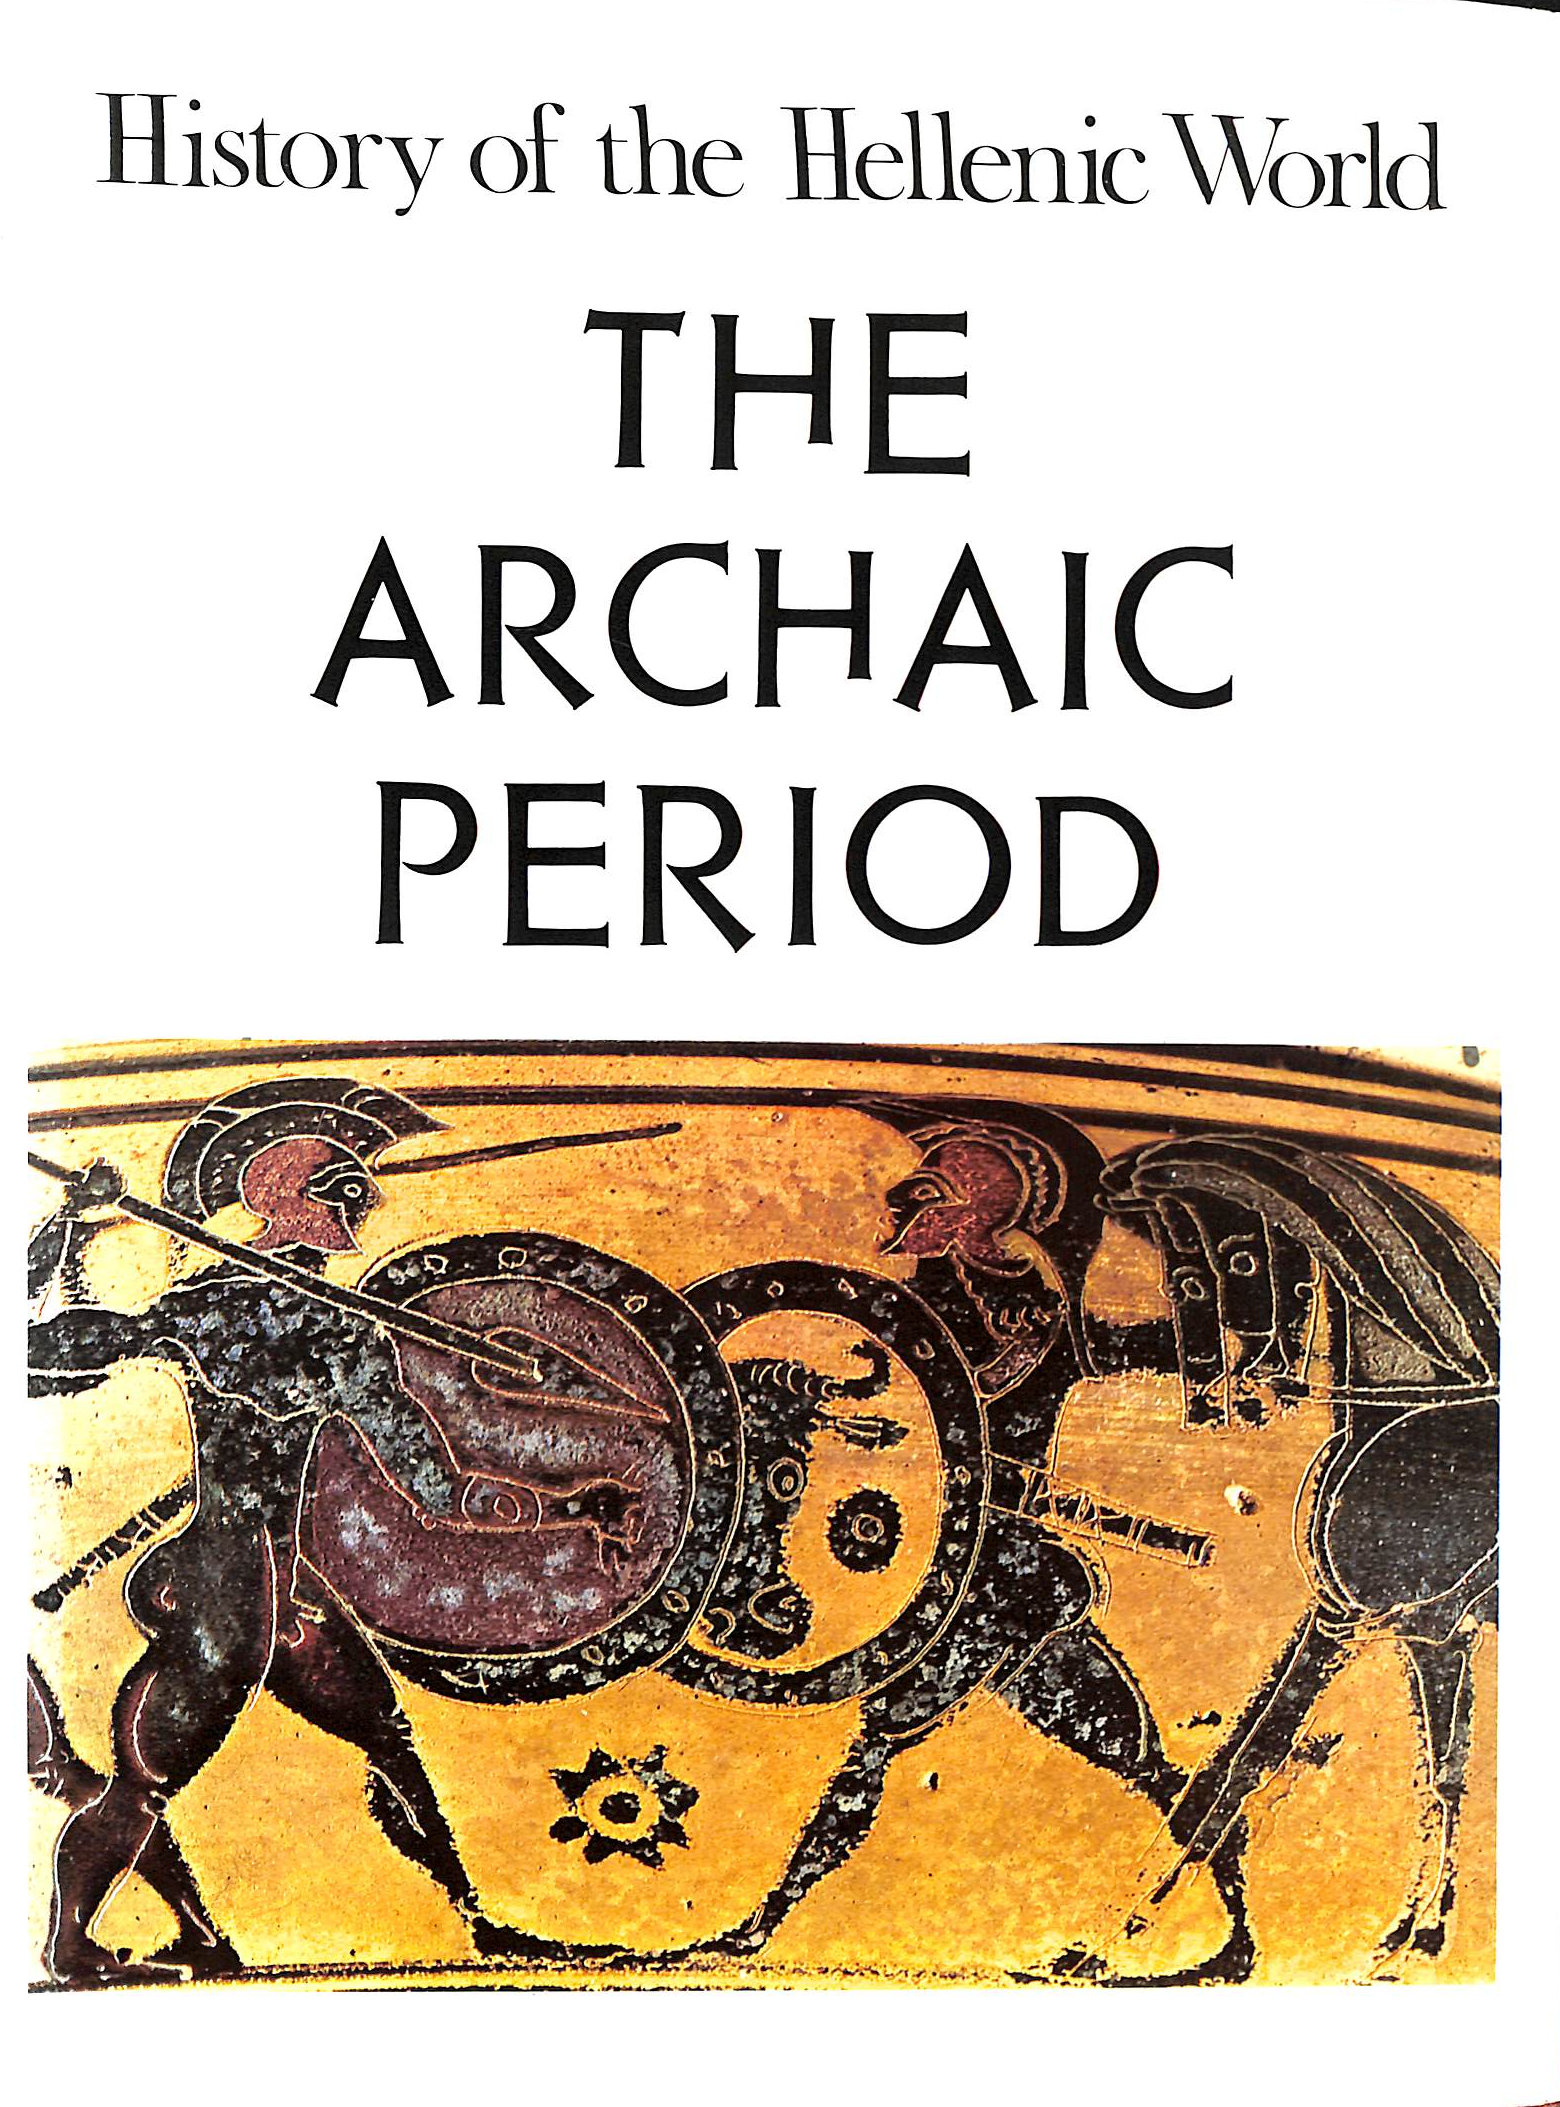 CHRISTOPOULOS, GEORGE A. [EDITOR]; SHERRARD, P. [TRANSLATOR]; - The Archaic Period (v. 2) (History of the Hellenic World)